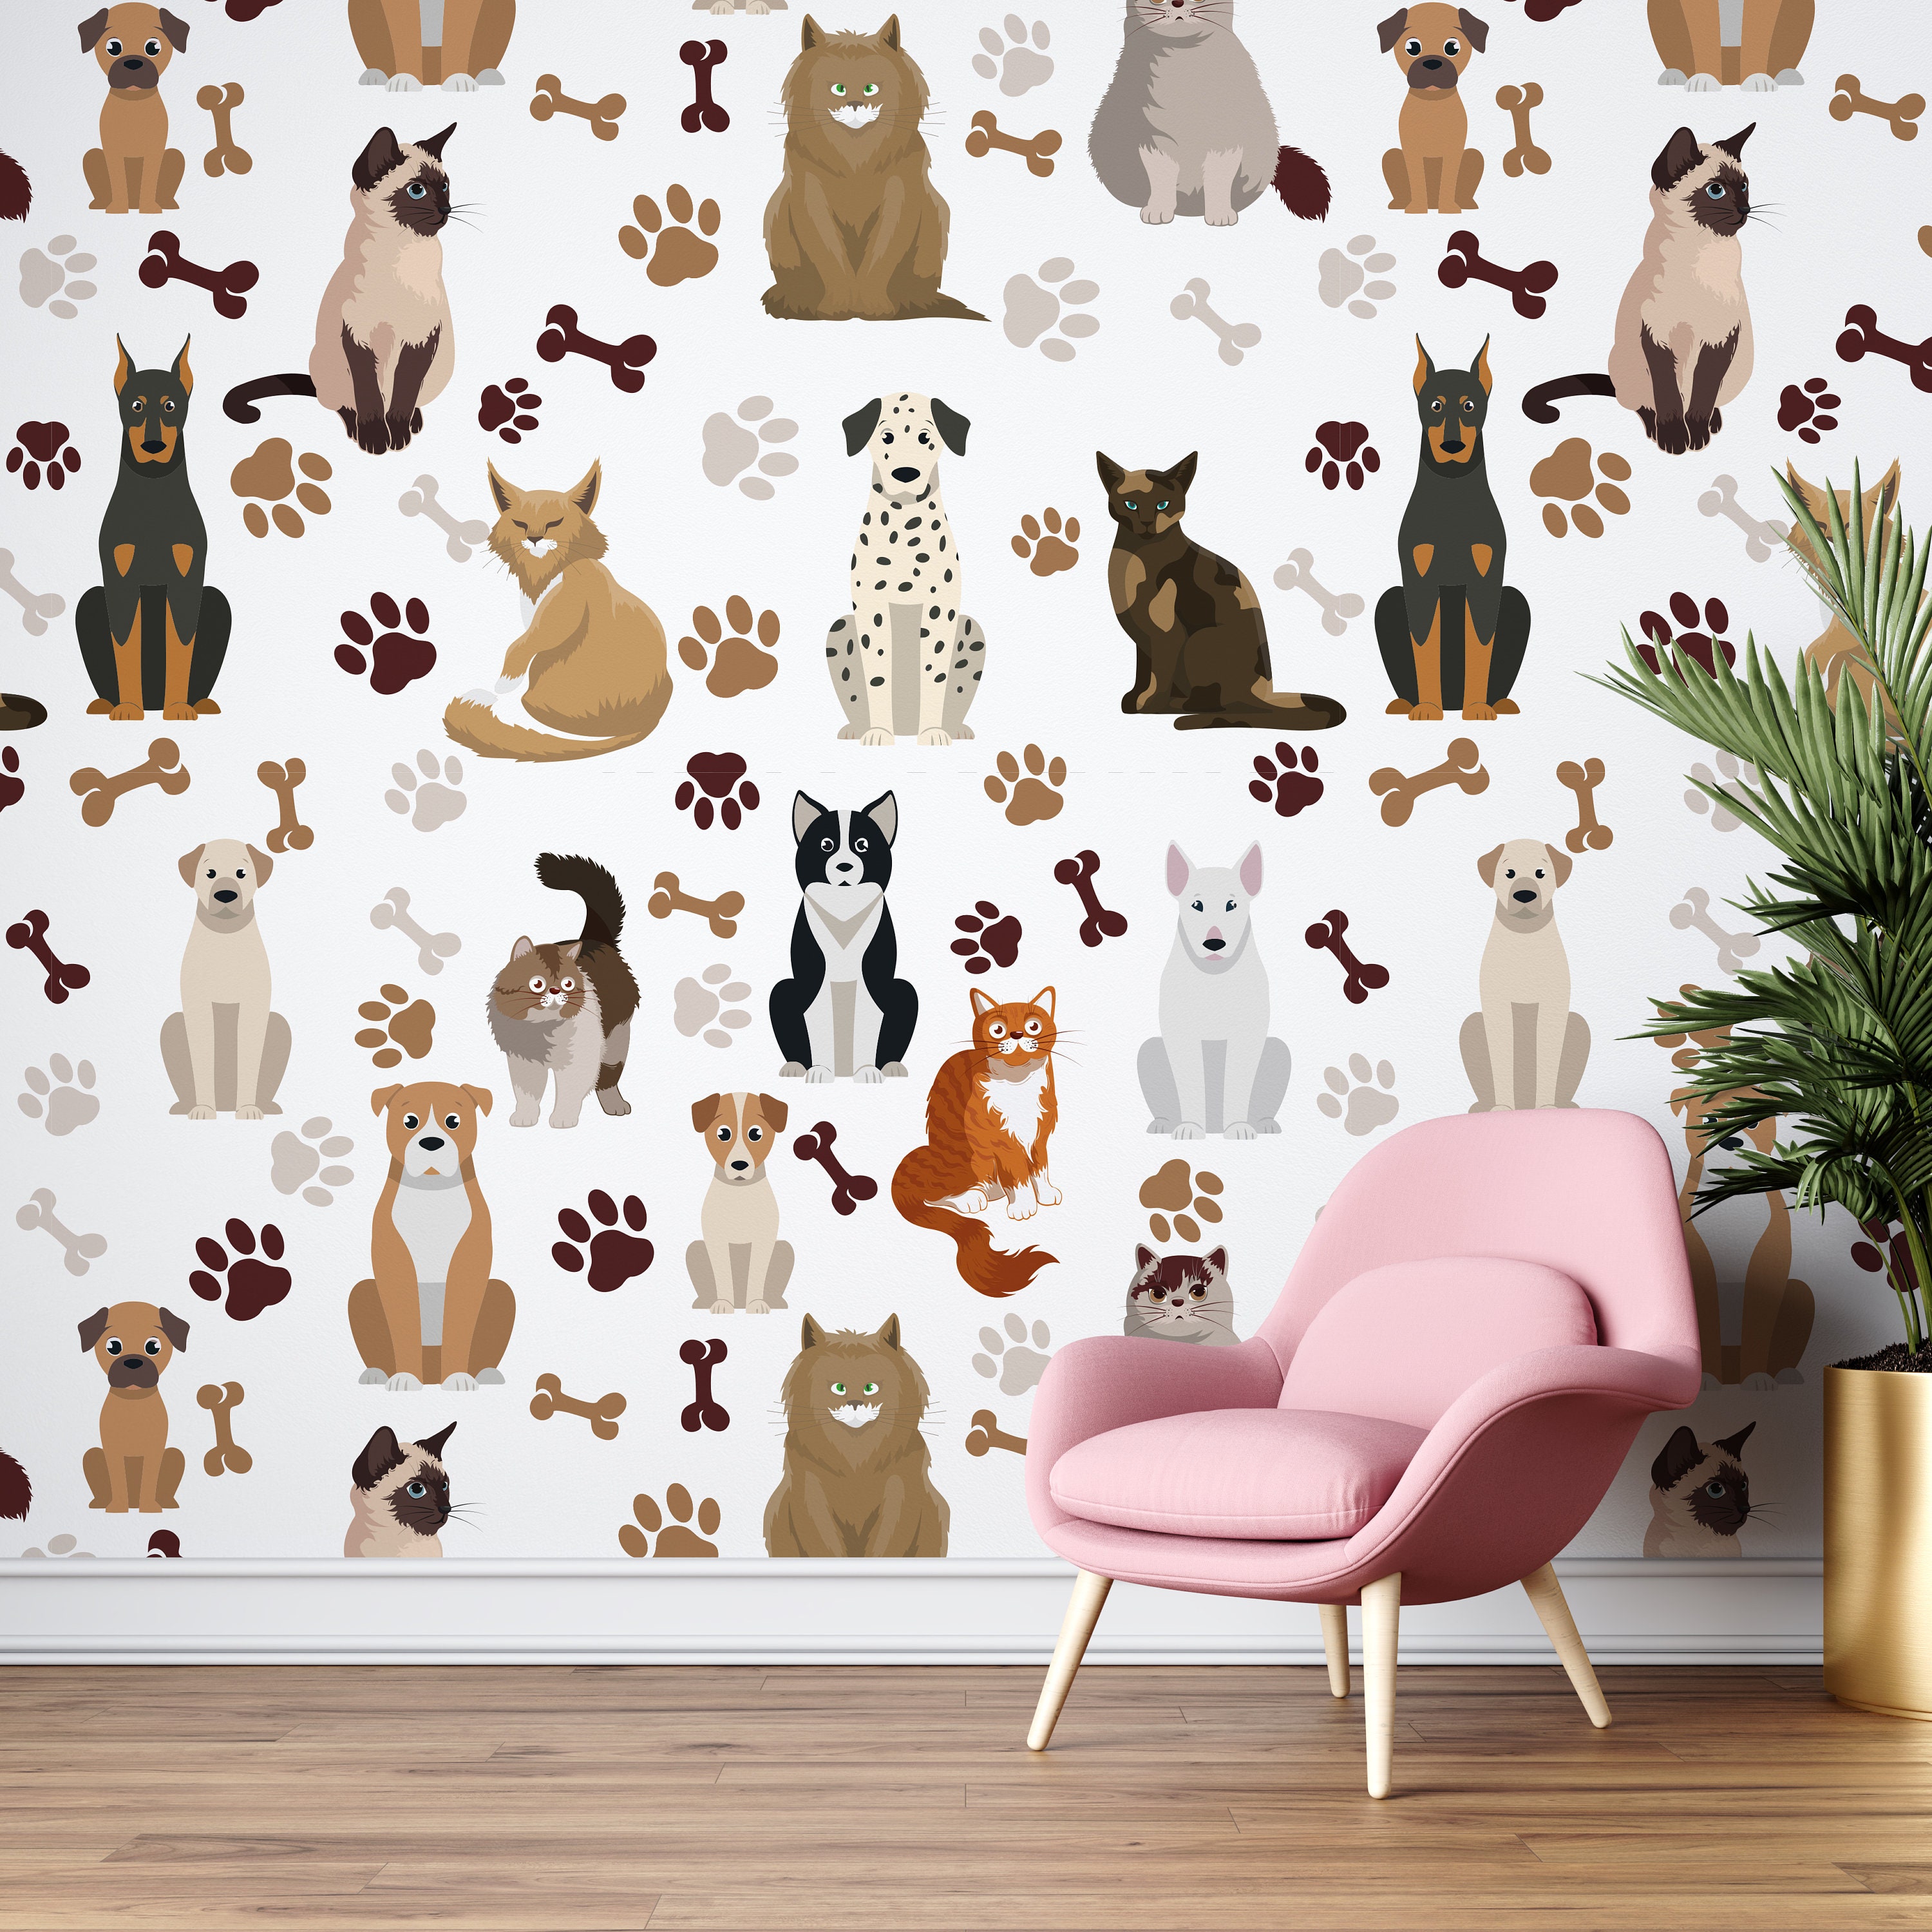 Cat and Dog Park Peel and Stick Removable Wall Decals Animal Theme (36-Piece Set) stk1111